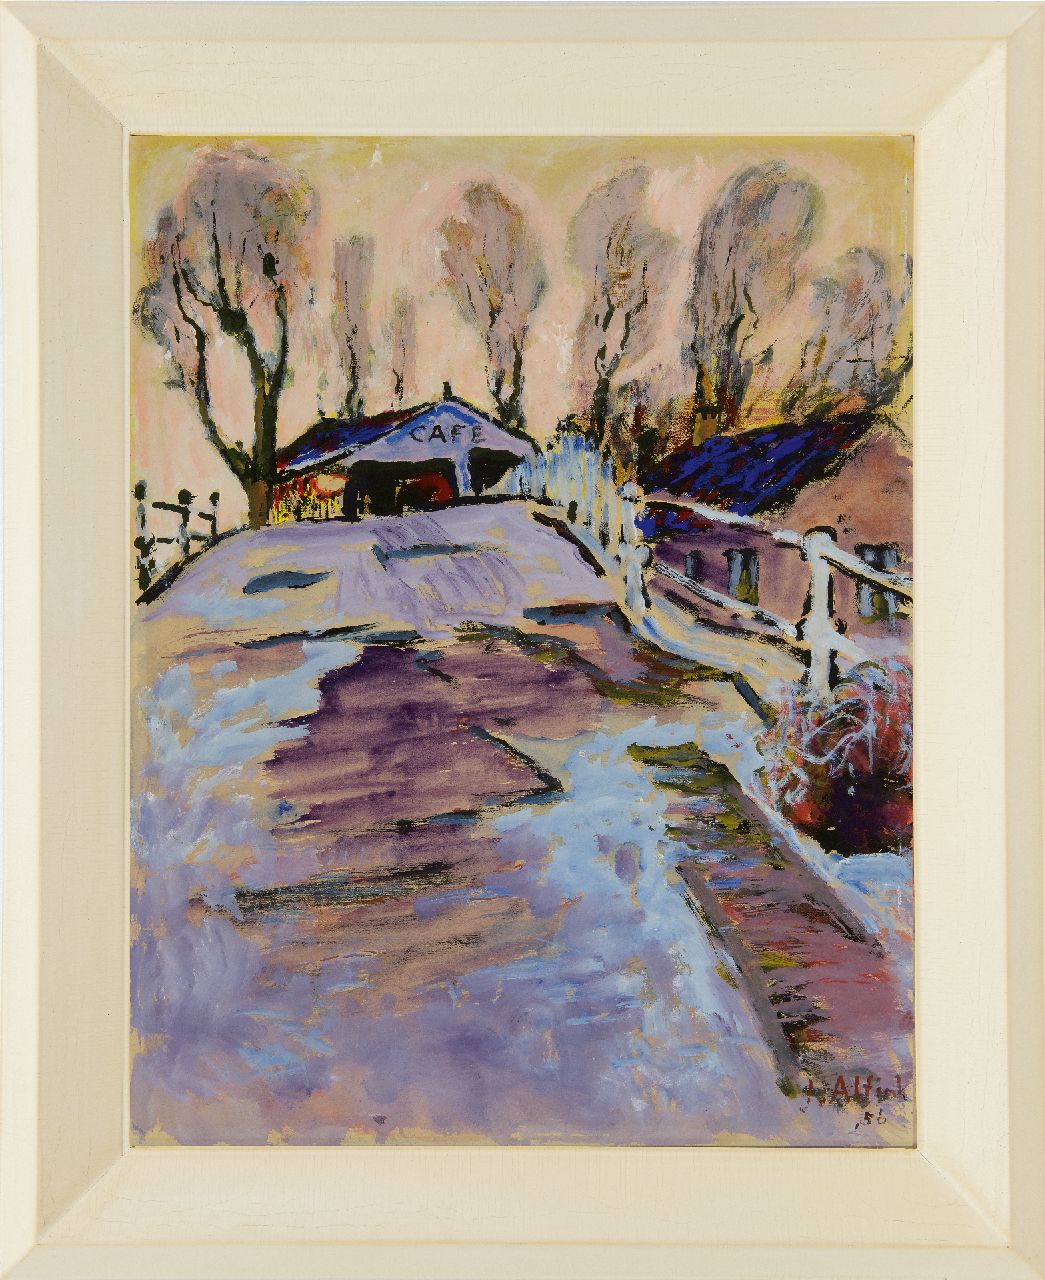 Altink J.  | Jan Altink, The bridge at Steentil near Aduard, watercolour and gouache on paper 63.5 x 49.5 cm, signed l.r. and dated '56